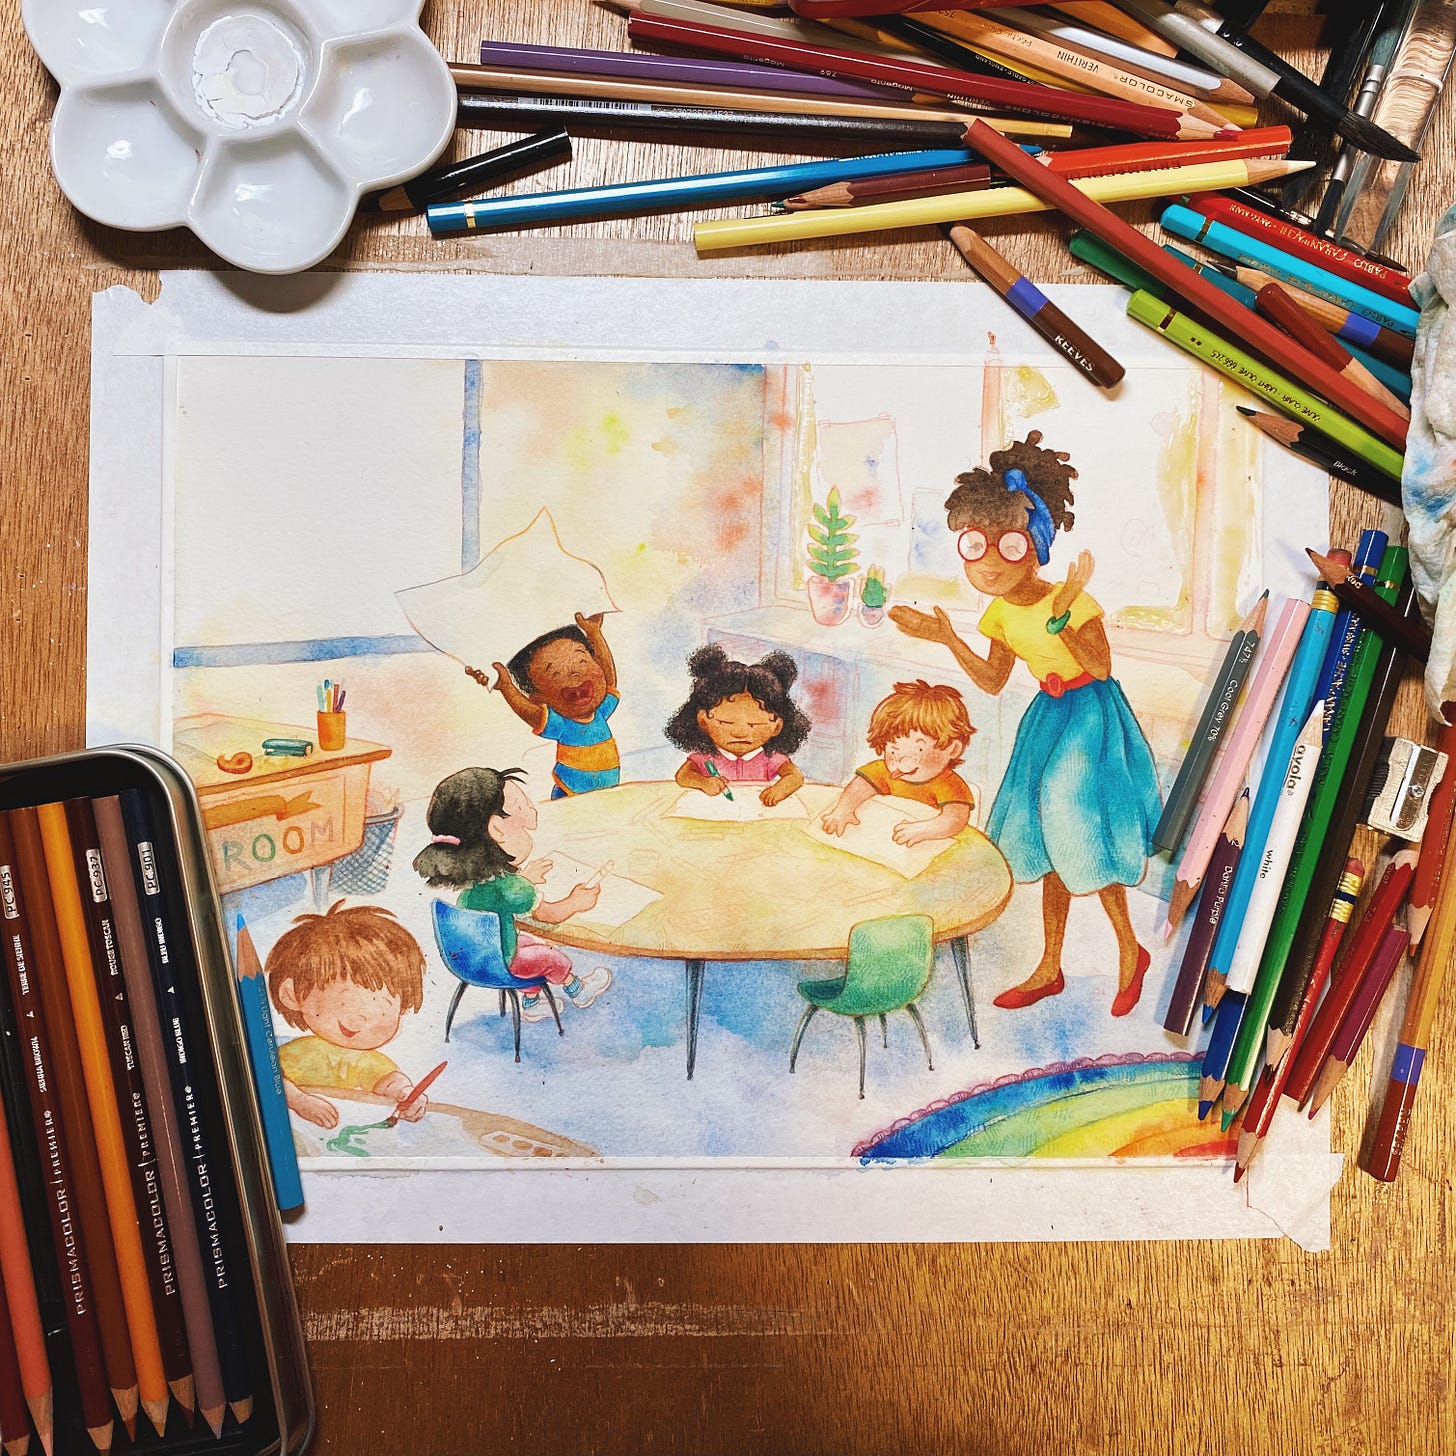 A photo of an illustration in progress surrounded by pencils and other art supplies